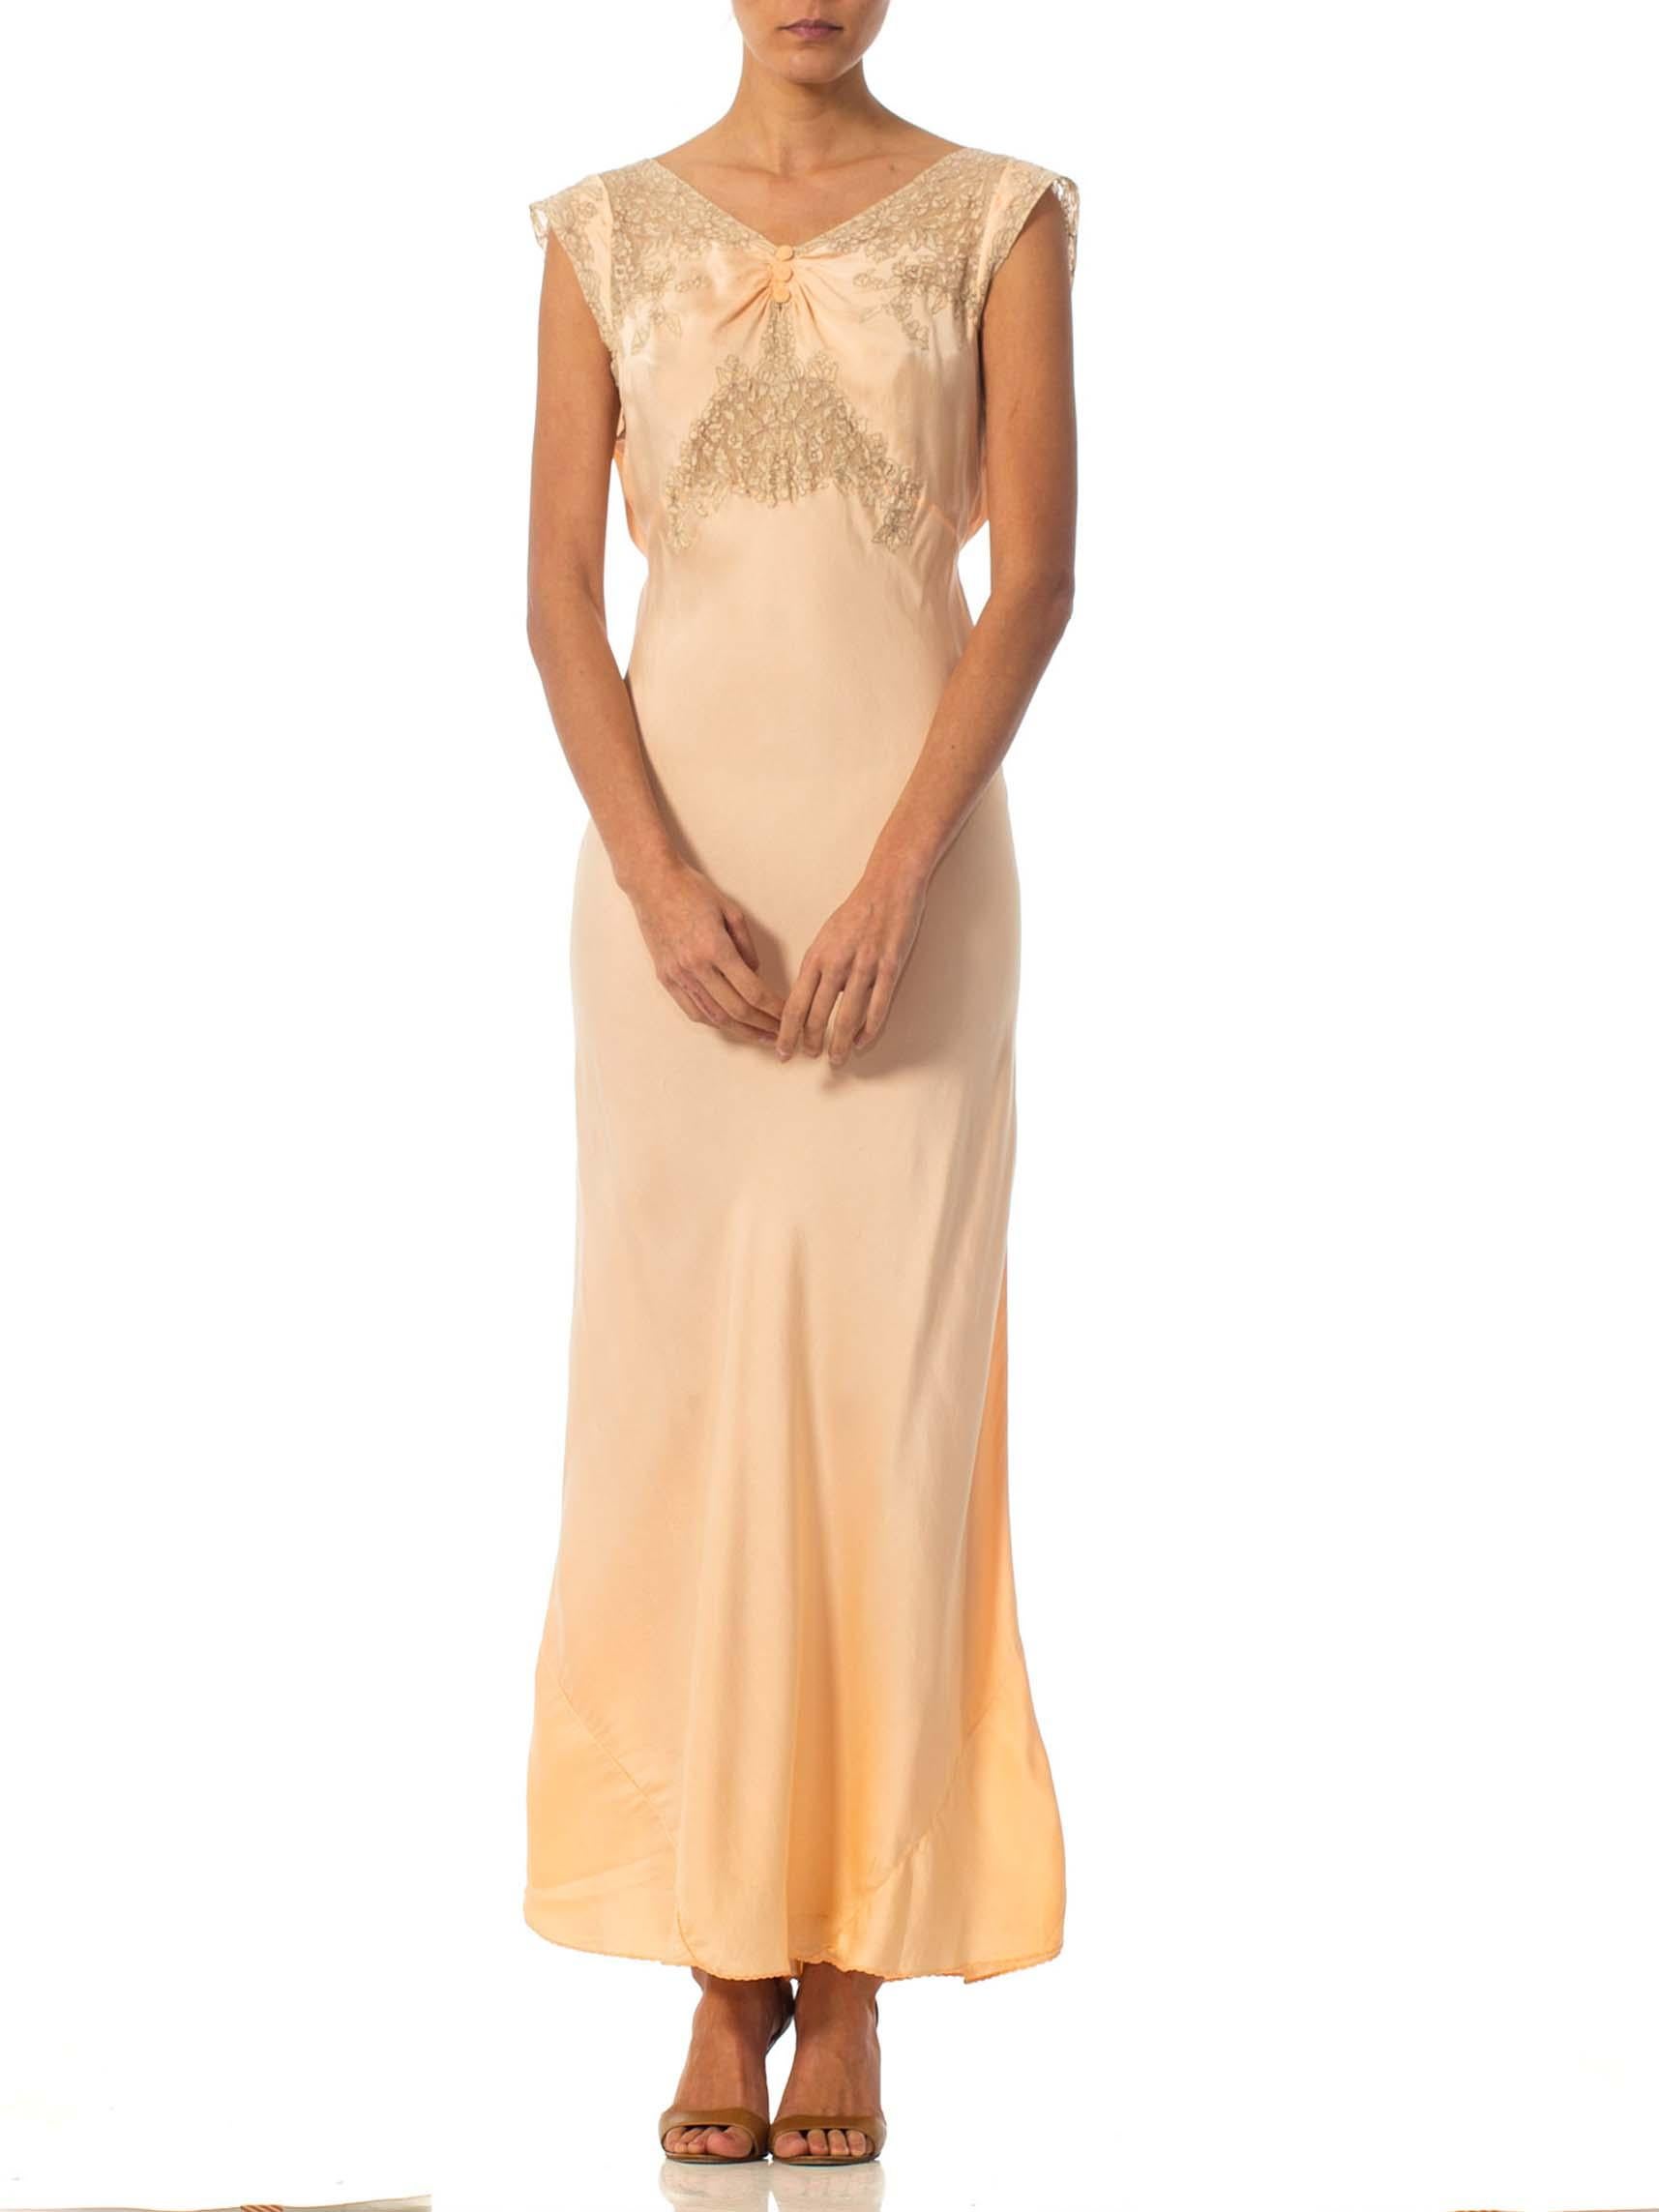 Blush Pink Bias Cut Silk Charmeuse & Lace Negligee With Side Ties 1